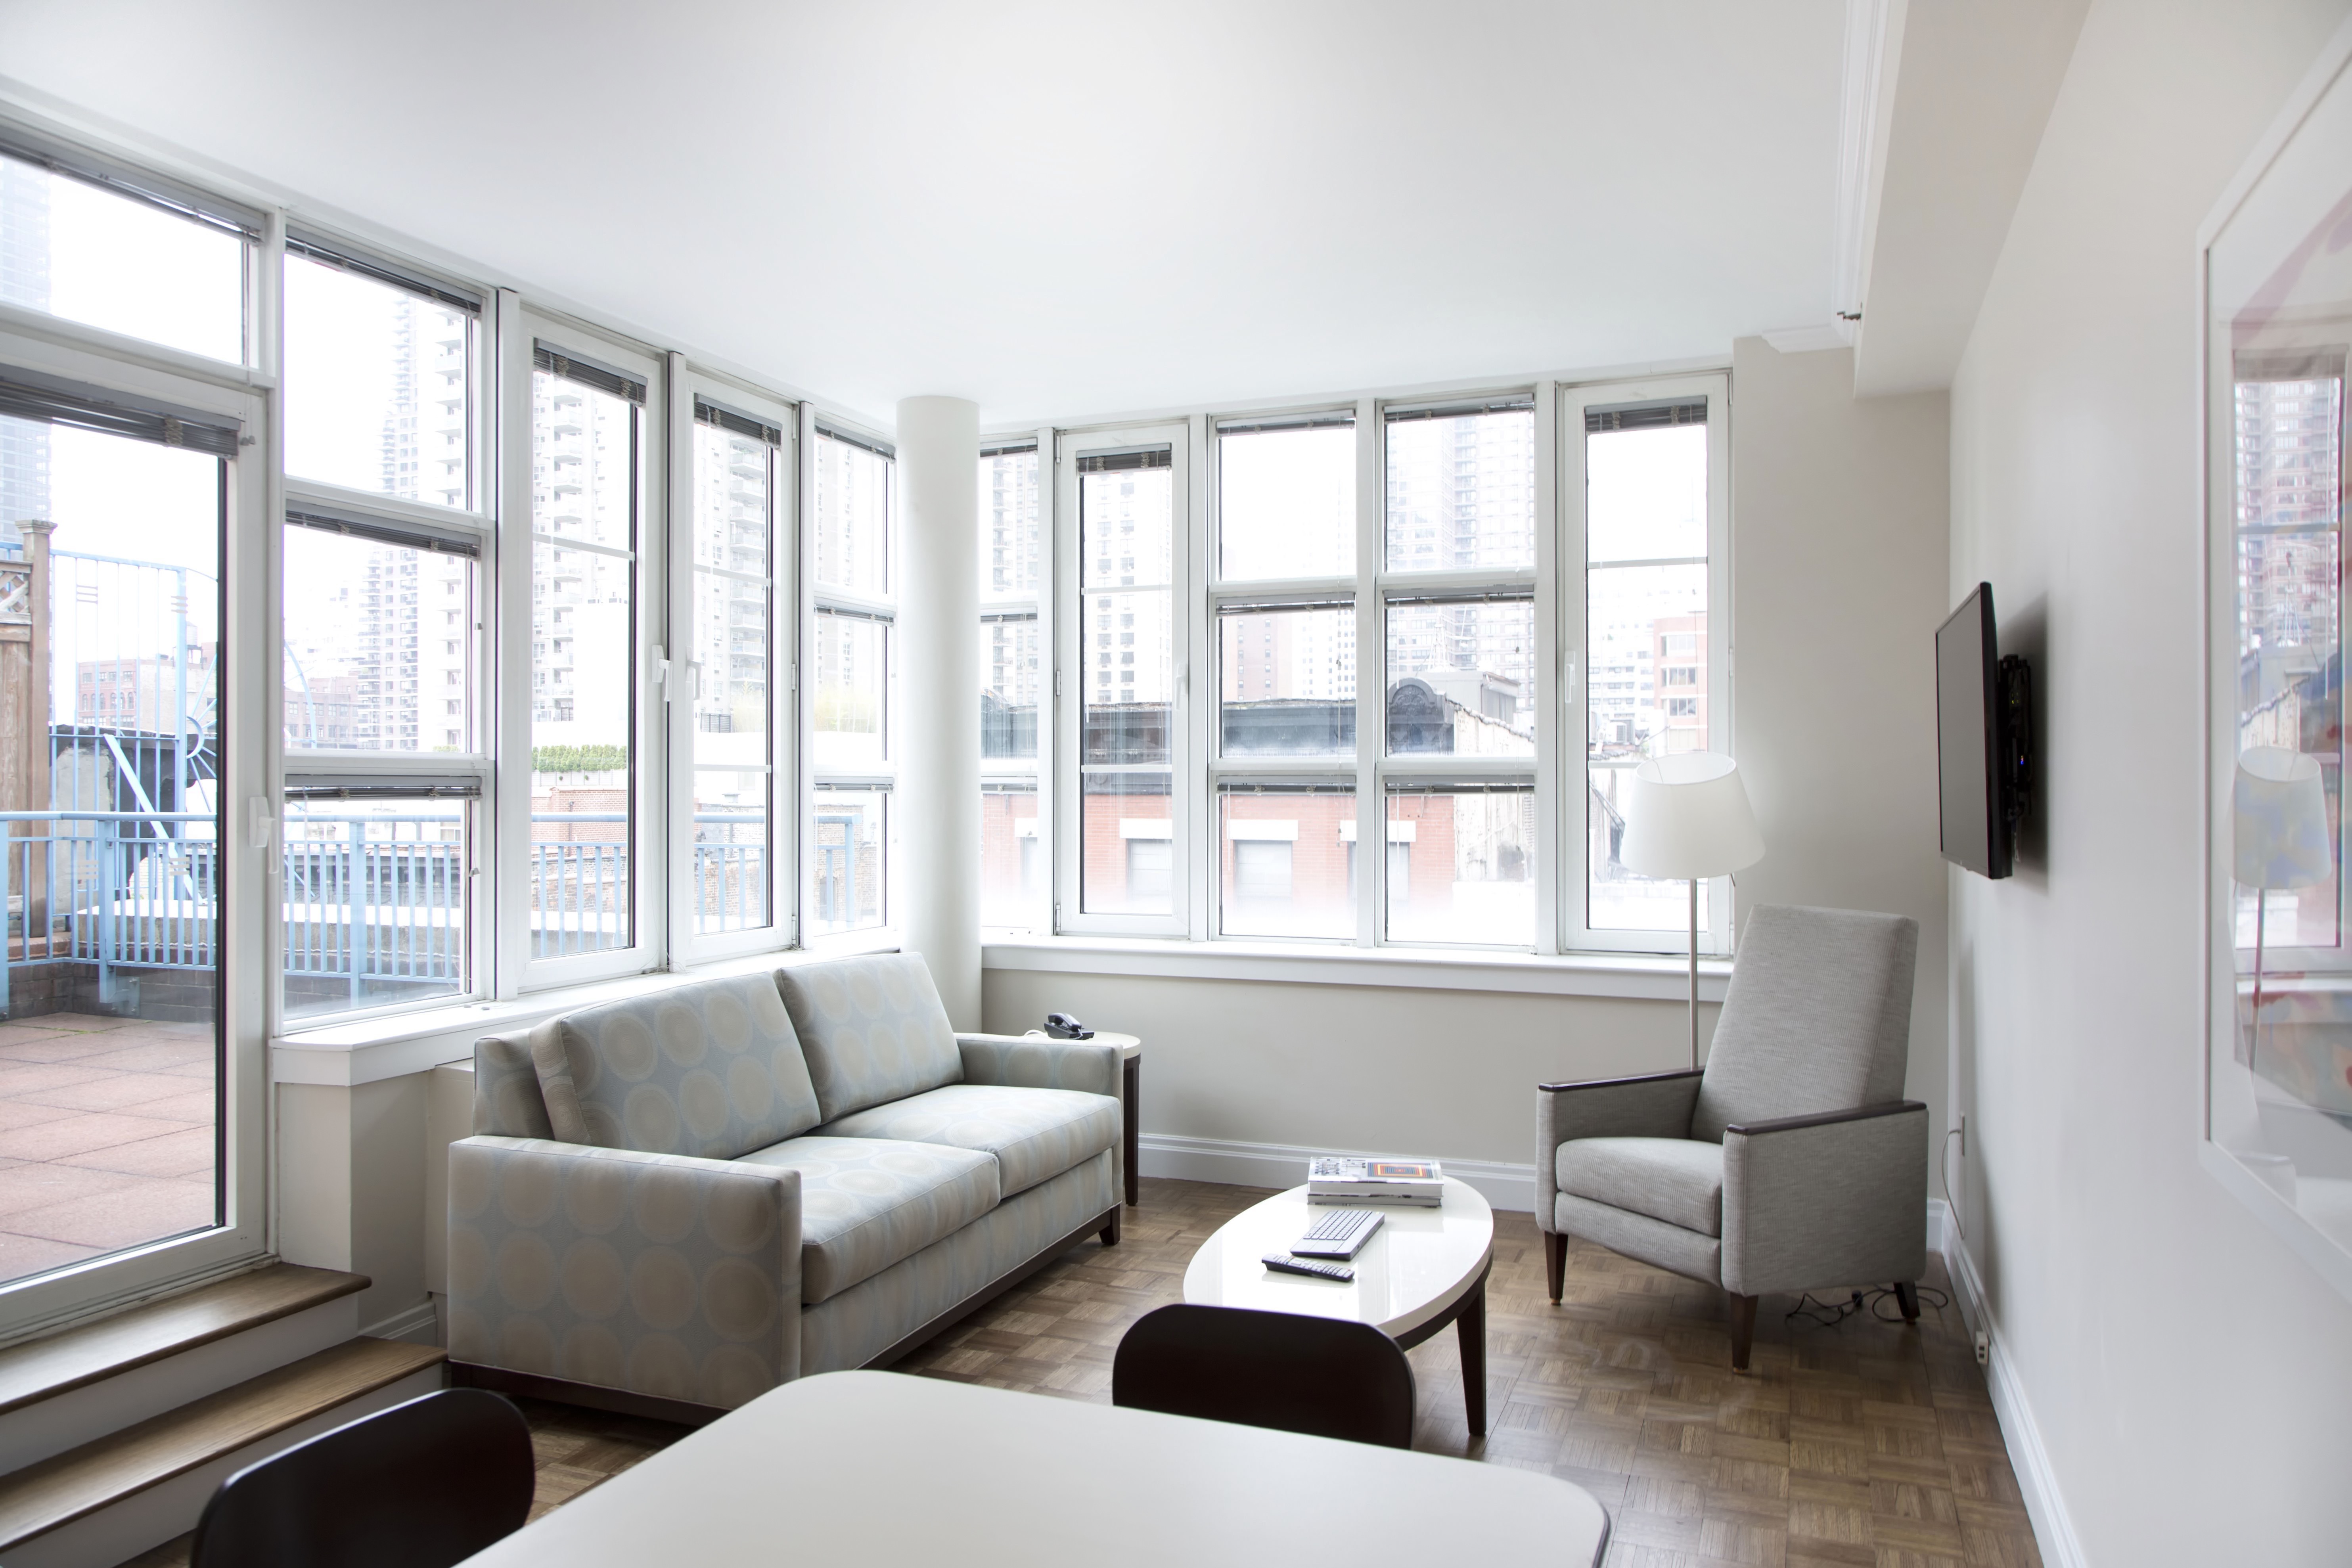 Bright, white waiting room with windows, furniture and television